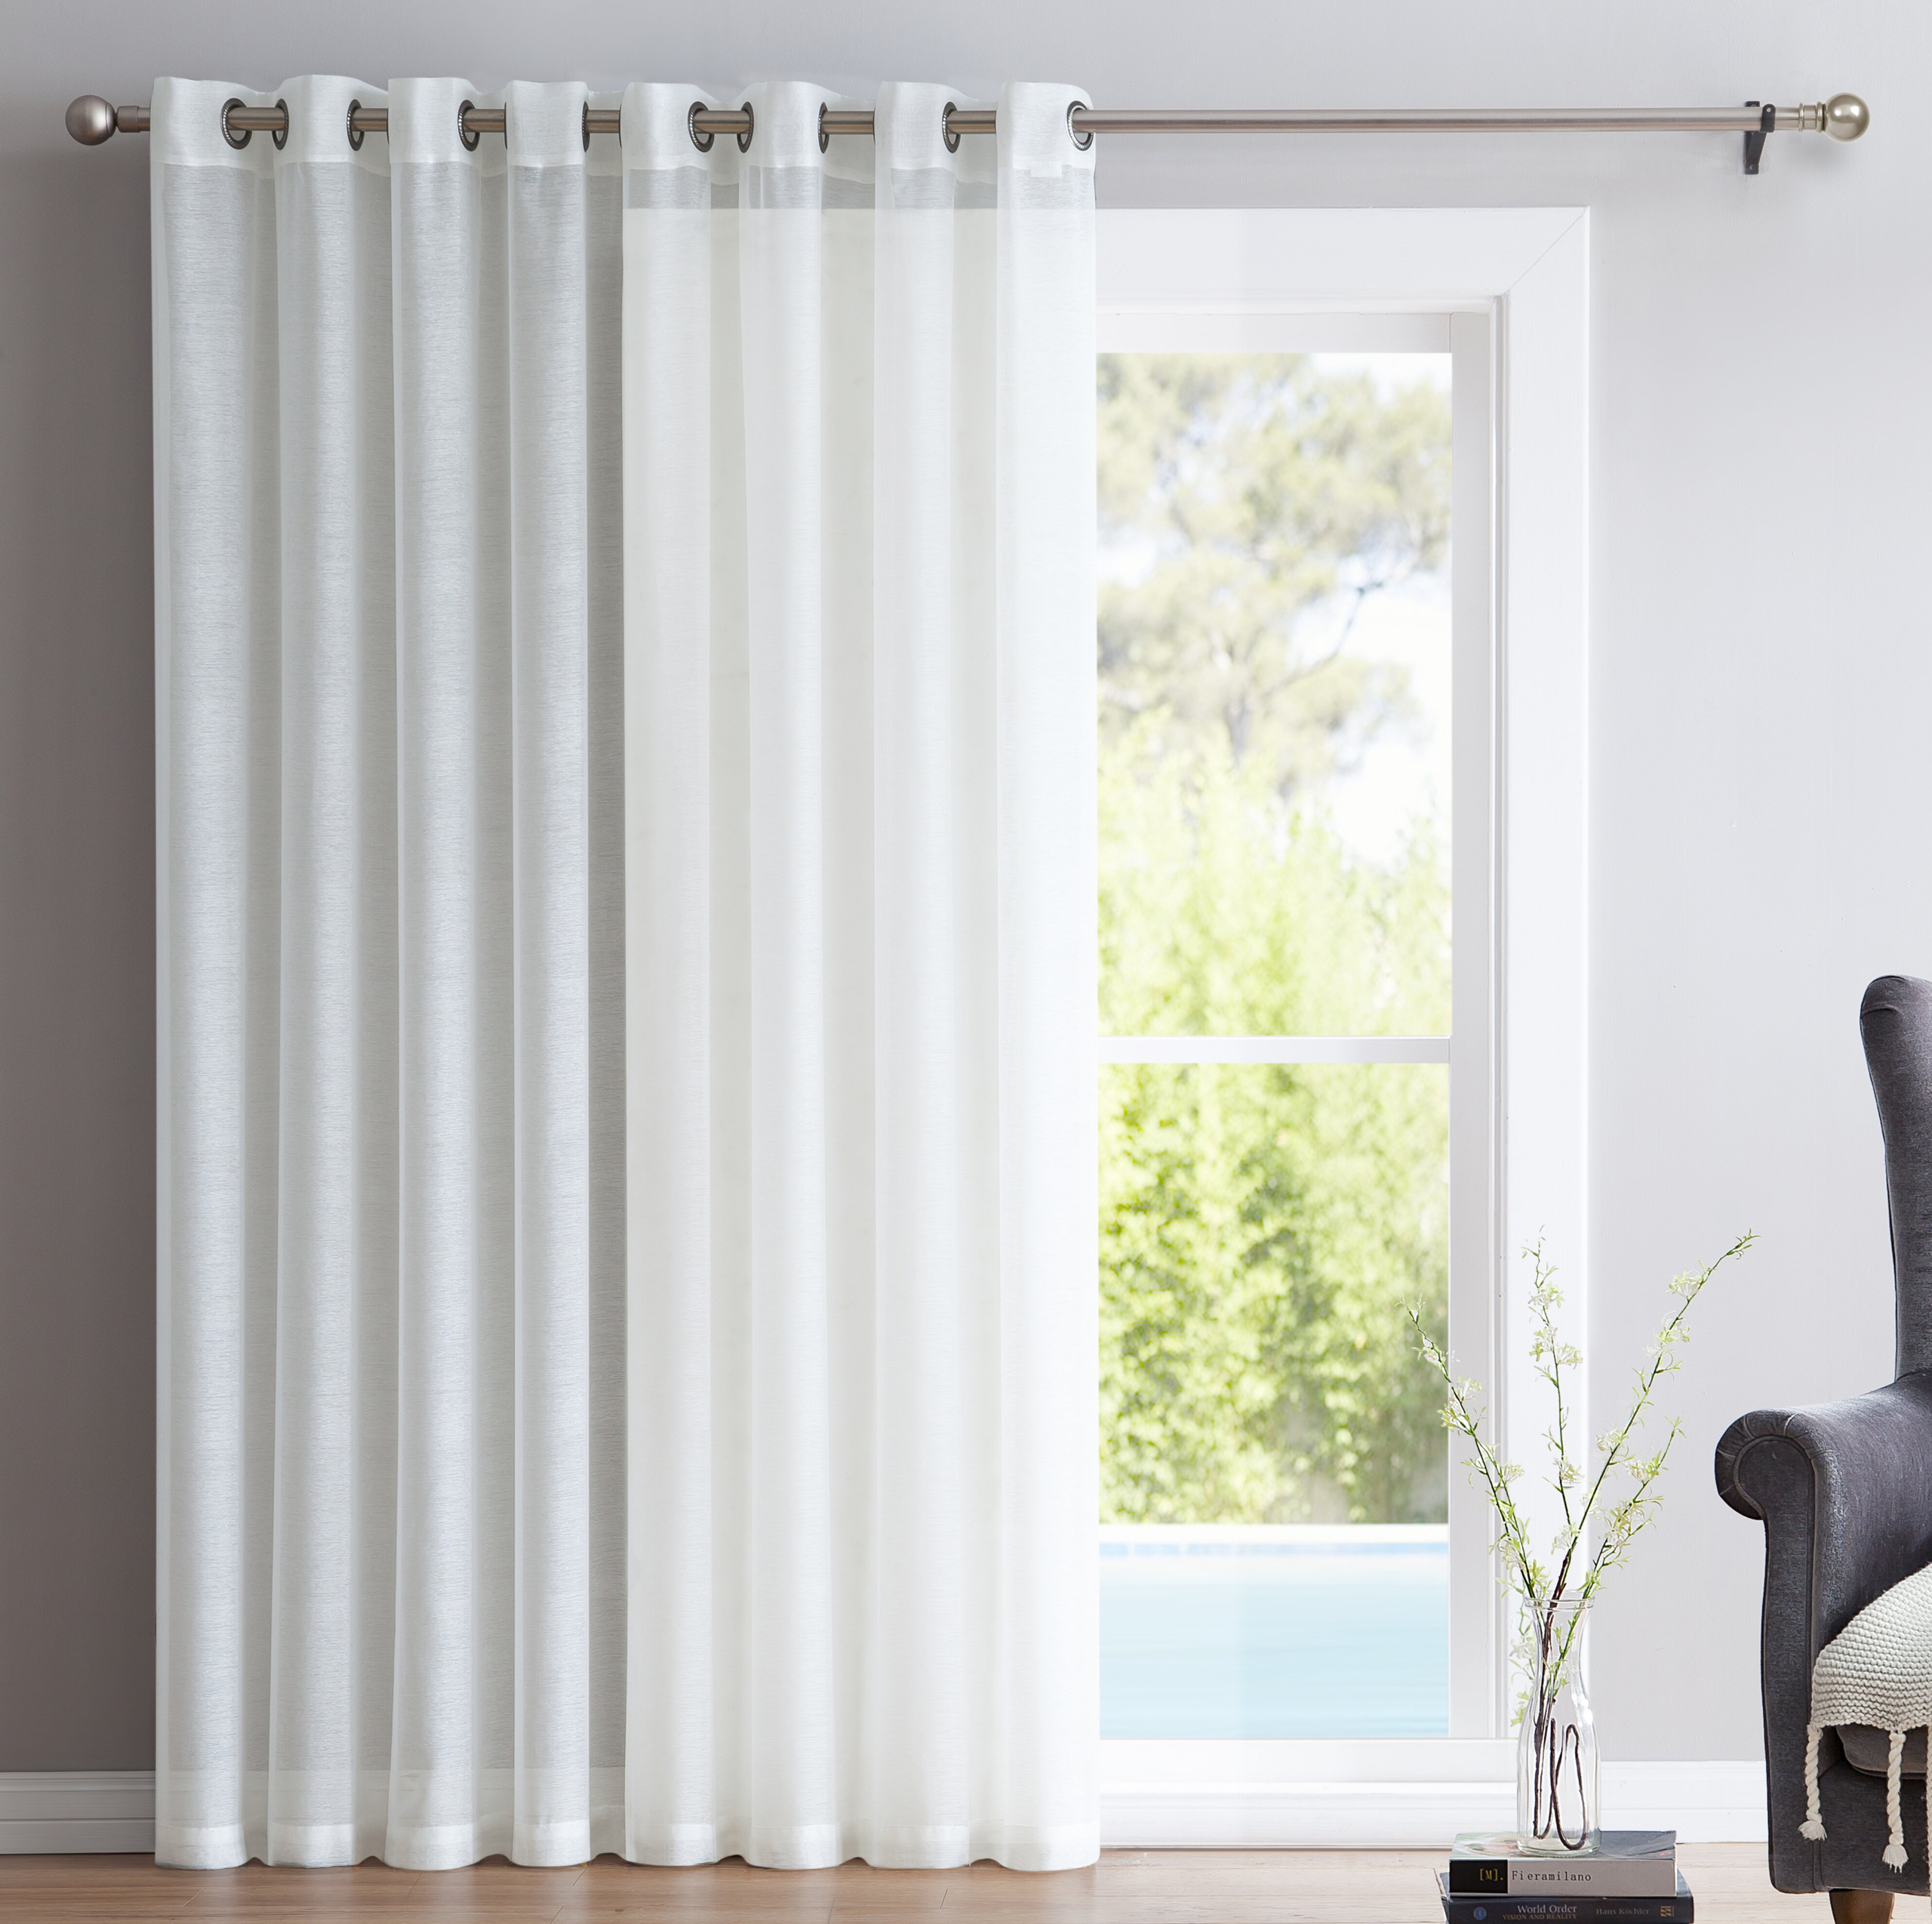 Single Panel Curtain for Home Front French Door Patio Glass Door White Drape 